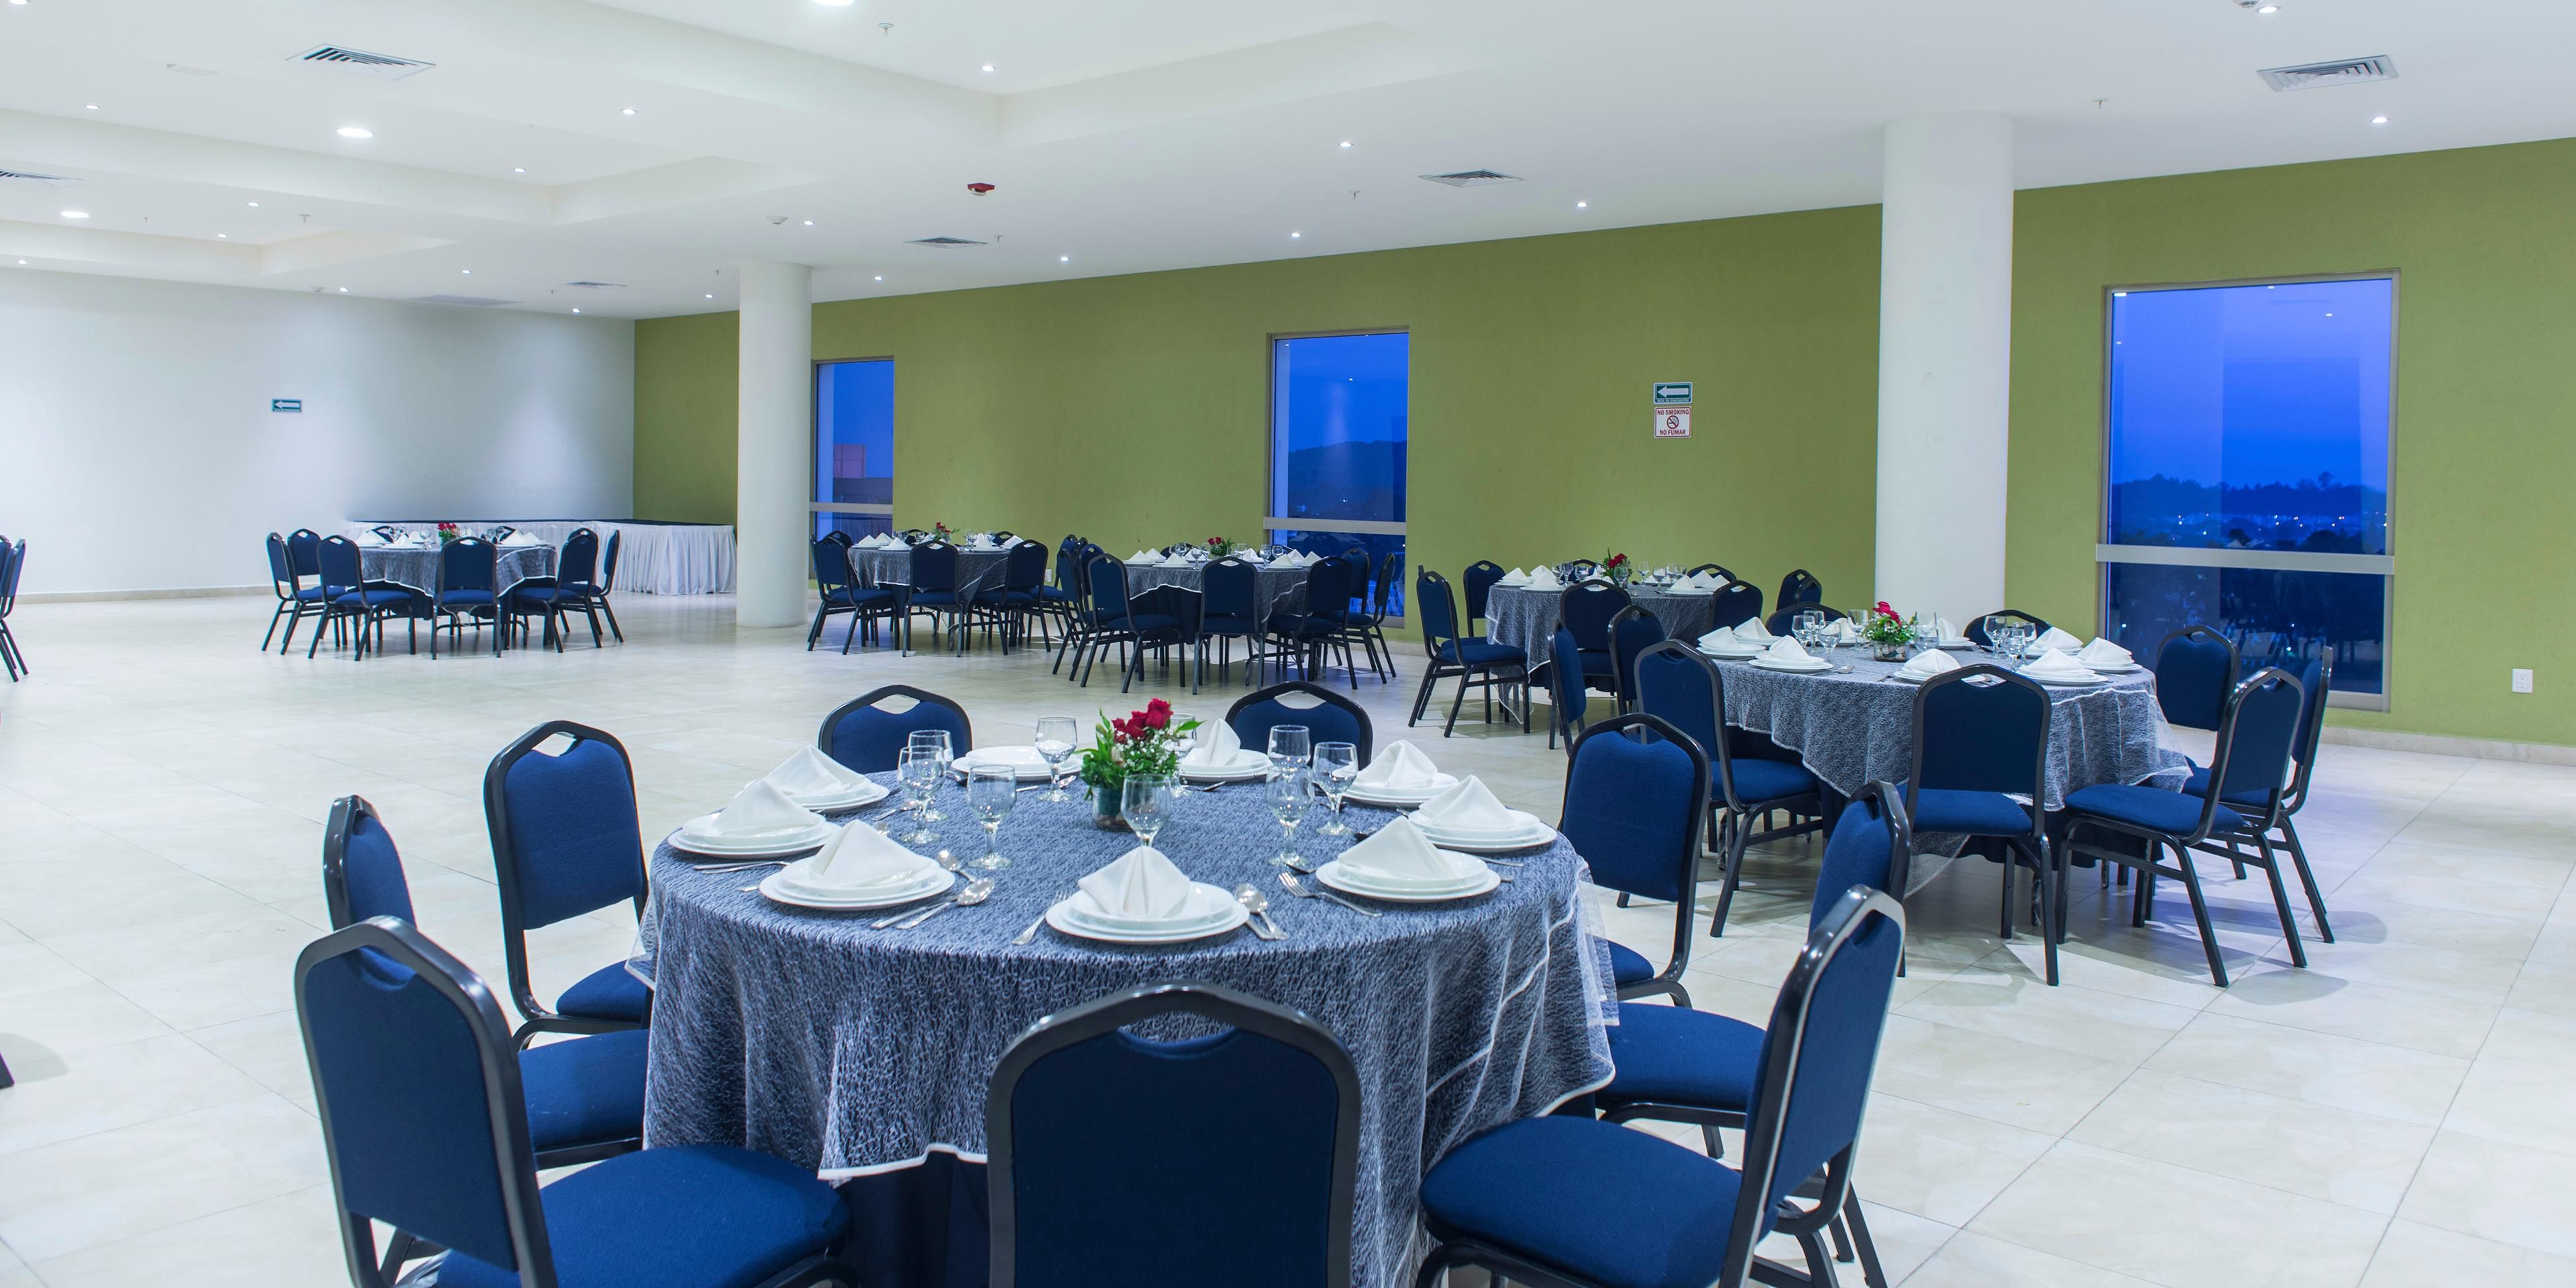 For Baptism, XV years, weddings, meetings, conferences and much more ... We have rooms for up to 800 people and a boardroom with capacity for up to 8 people.